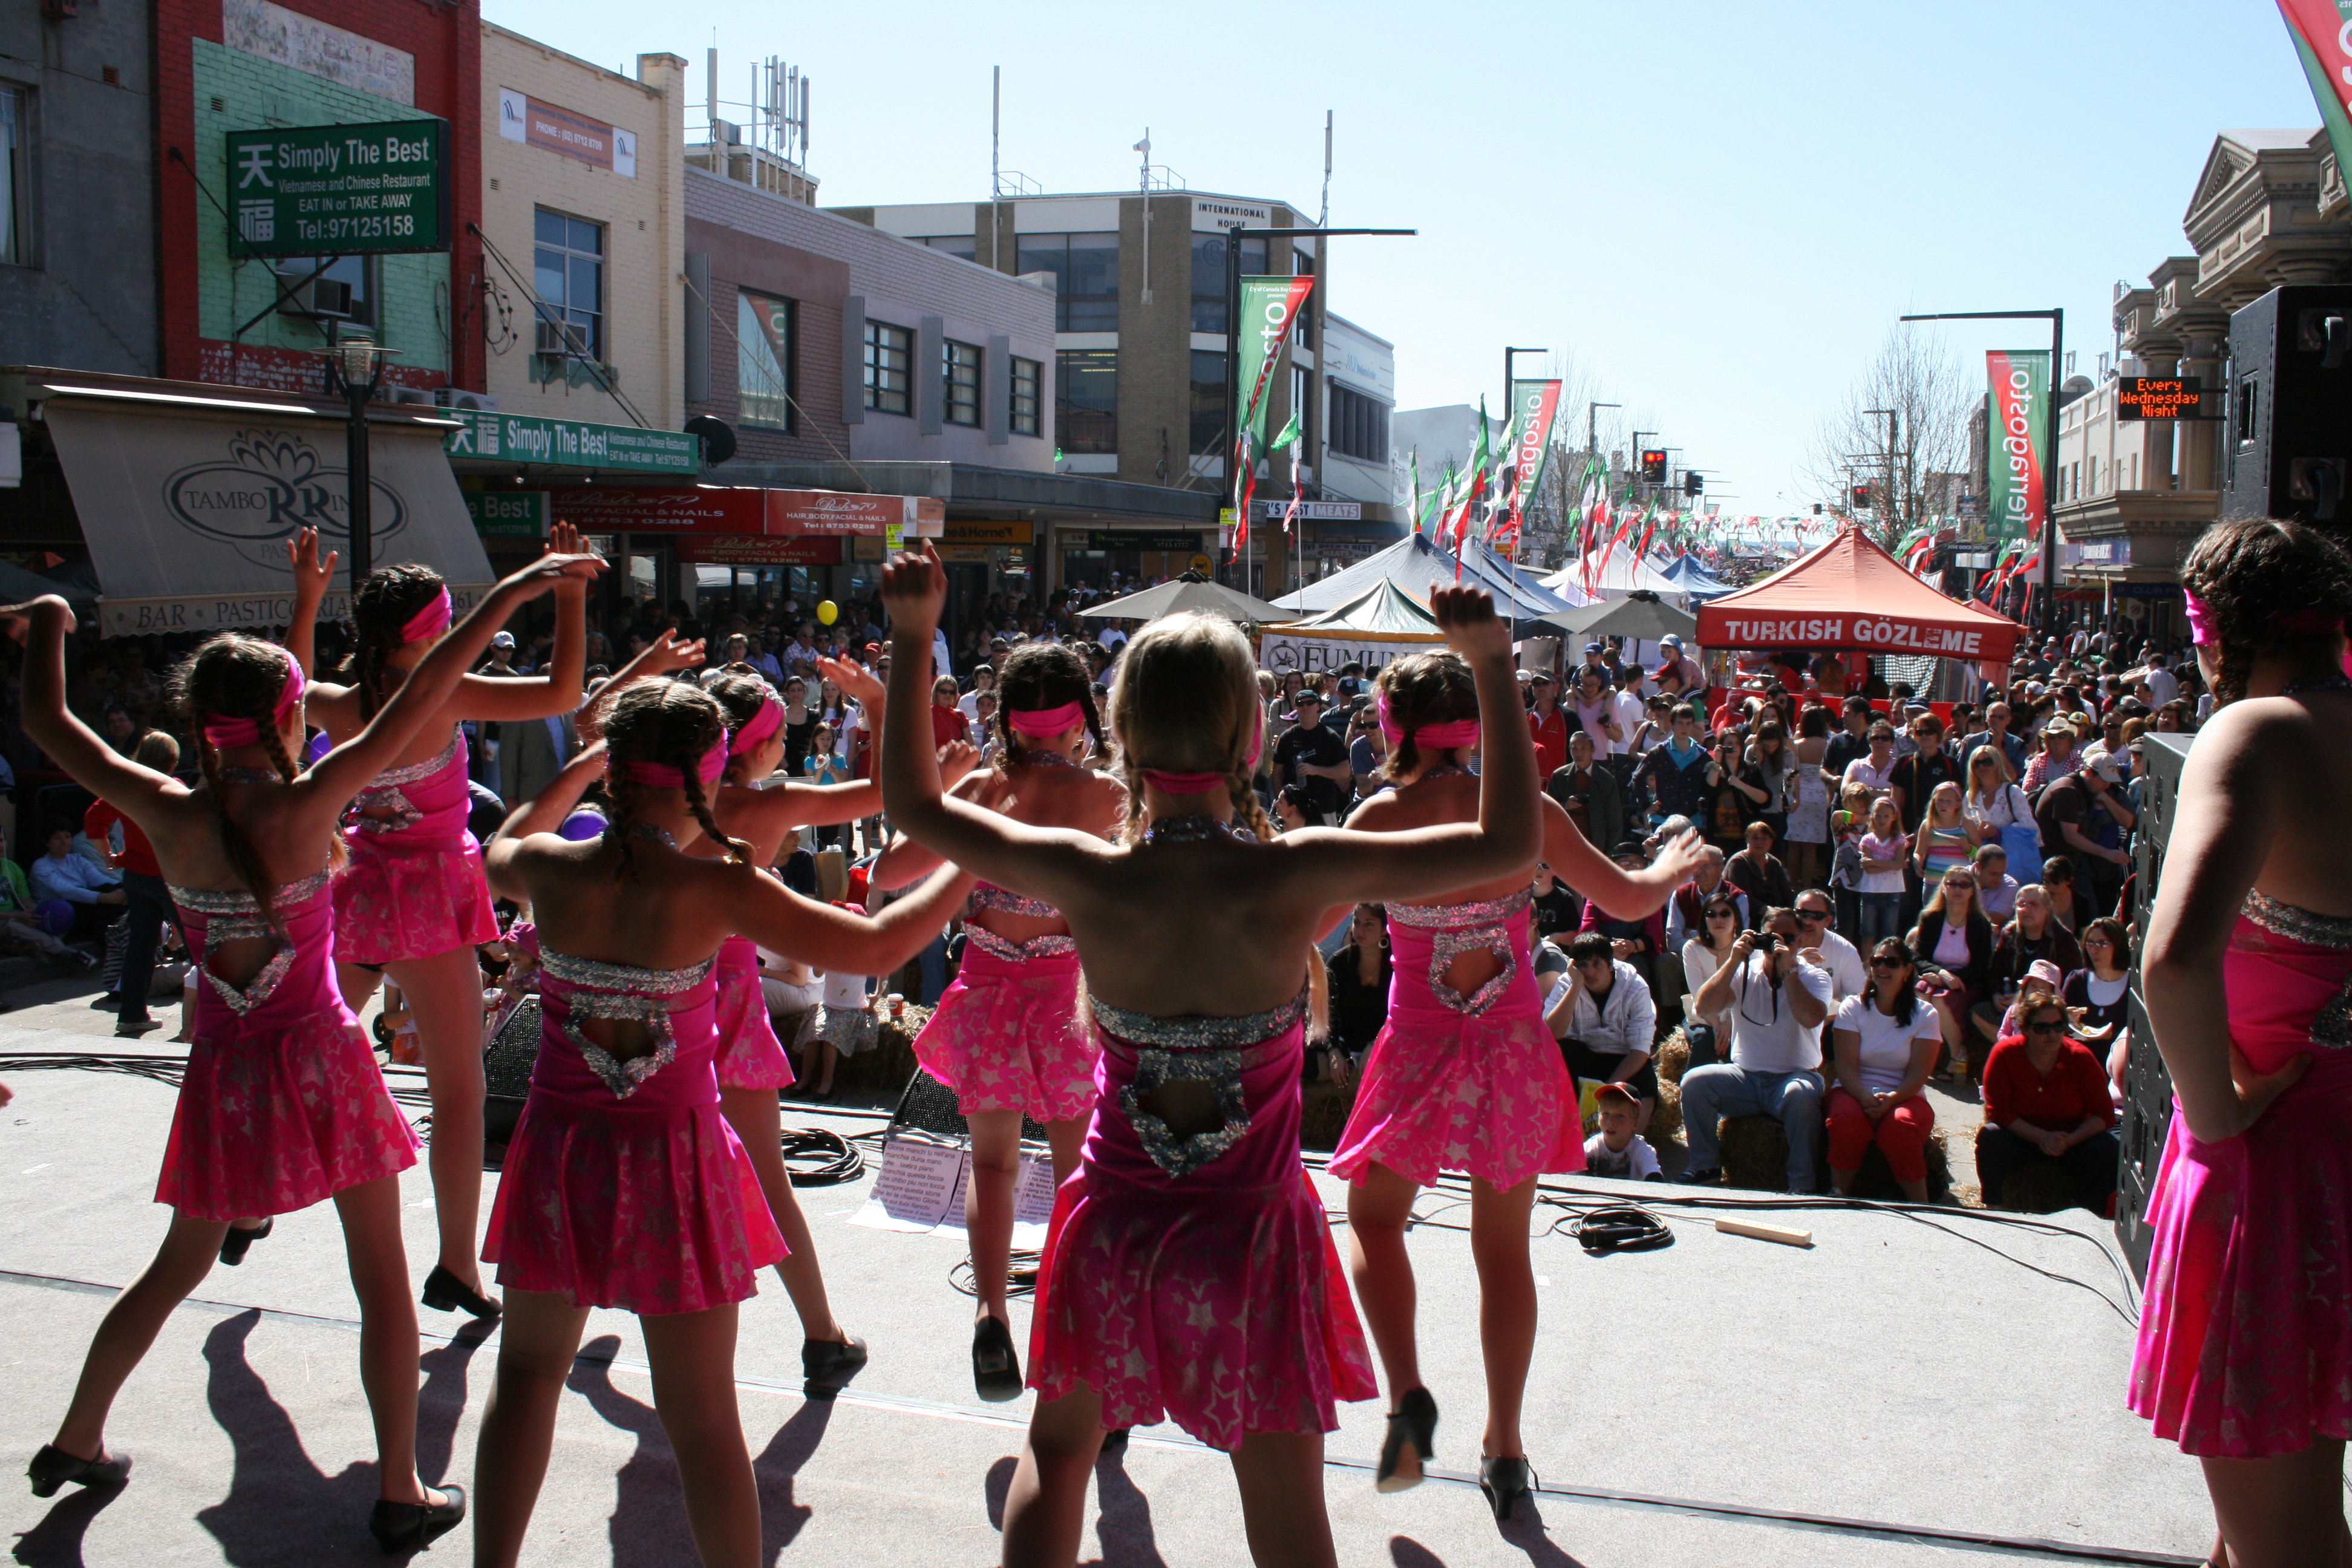 girls performing on stage in front of crowd